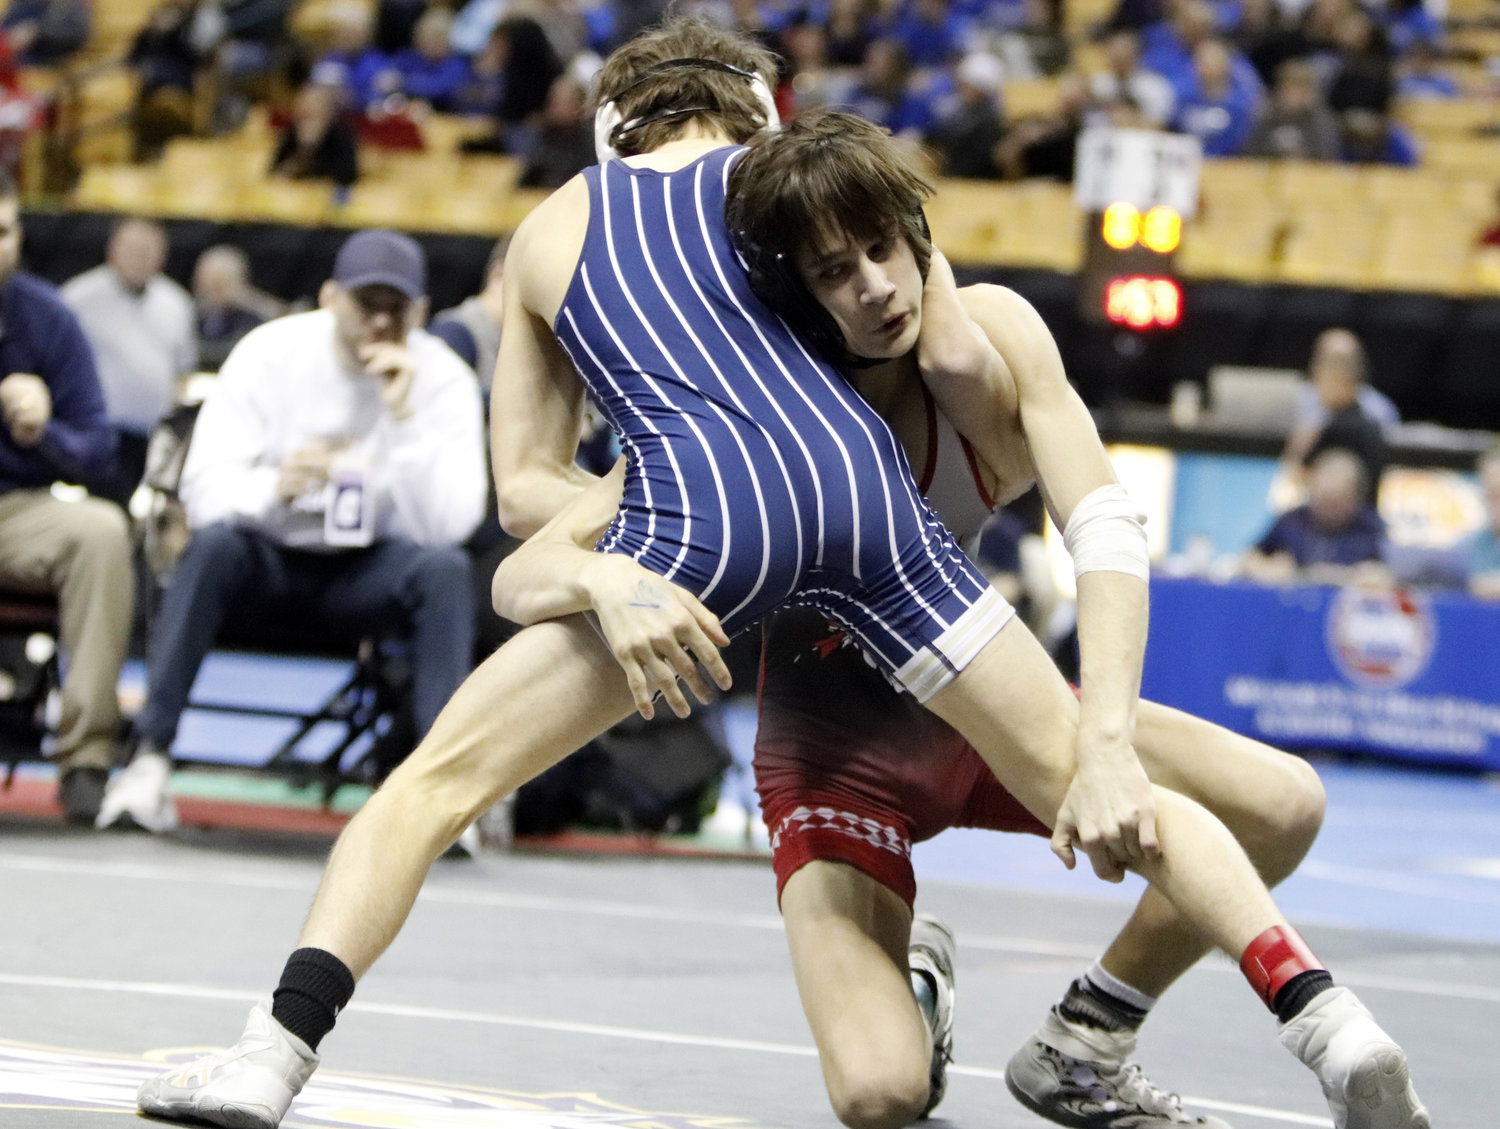 Manny McCauley (right) wrestles against Parker Lock of Helias Catholic during his opening match at the state wrestling tournament.